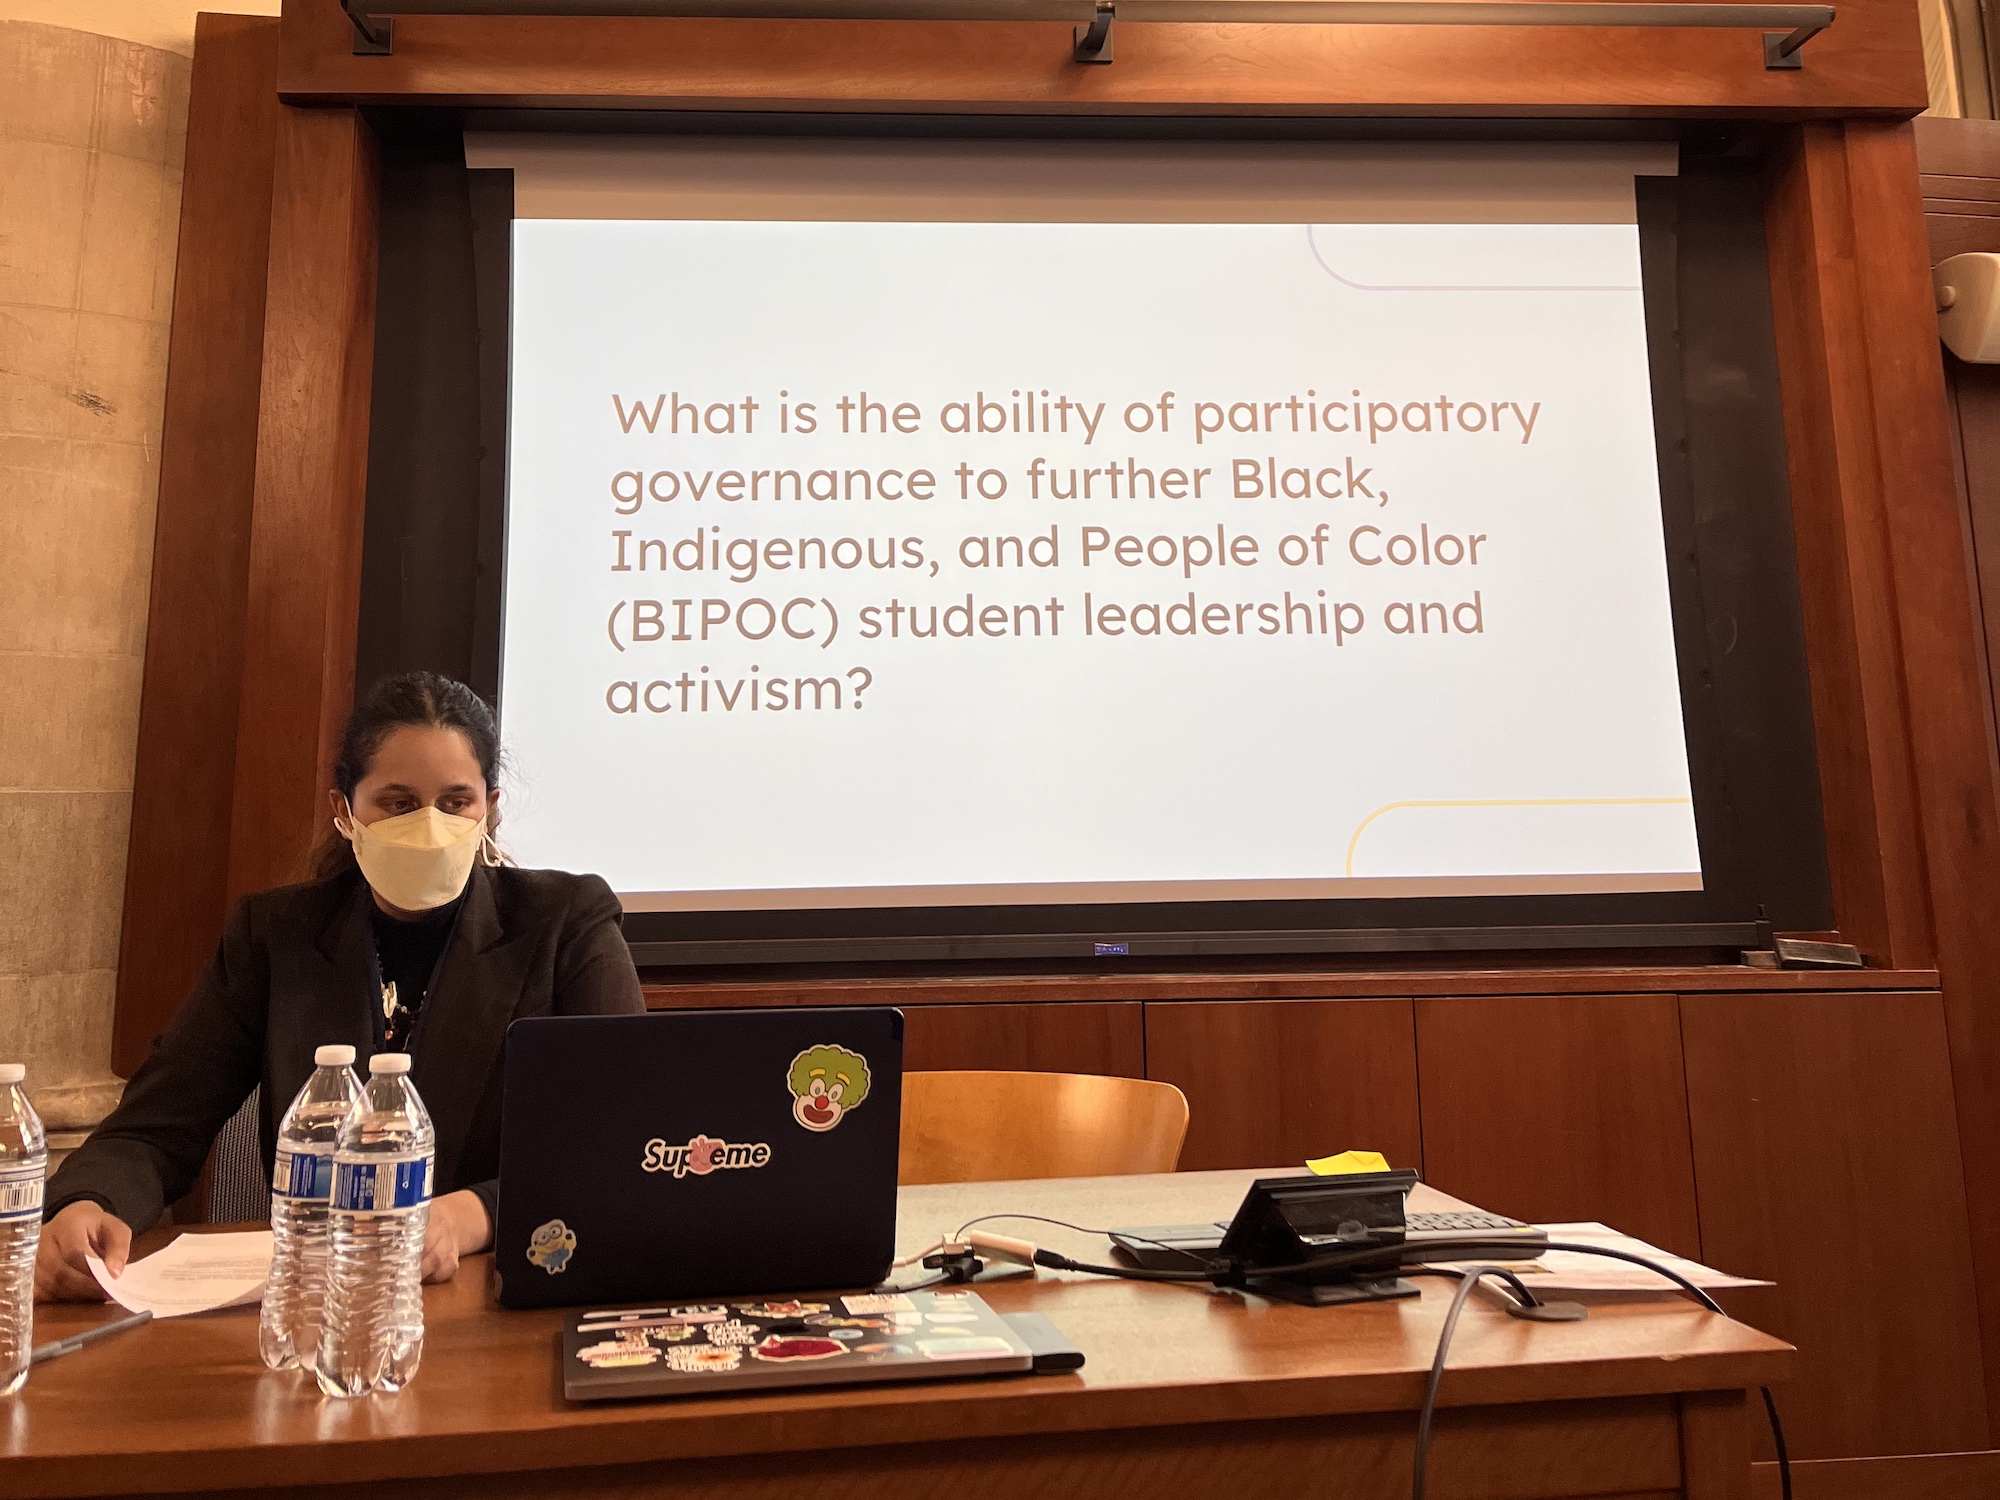 A student presenting at the 2023 Ethnic Studies Symposium in front of a slide that reads "What is the ability of participatory governance to further Black, Indigenous, and People of Color (BIPOC) student leadership and activism?"